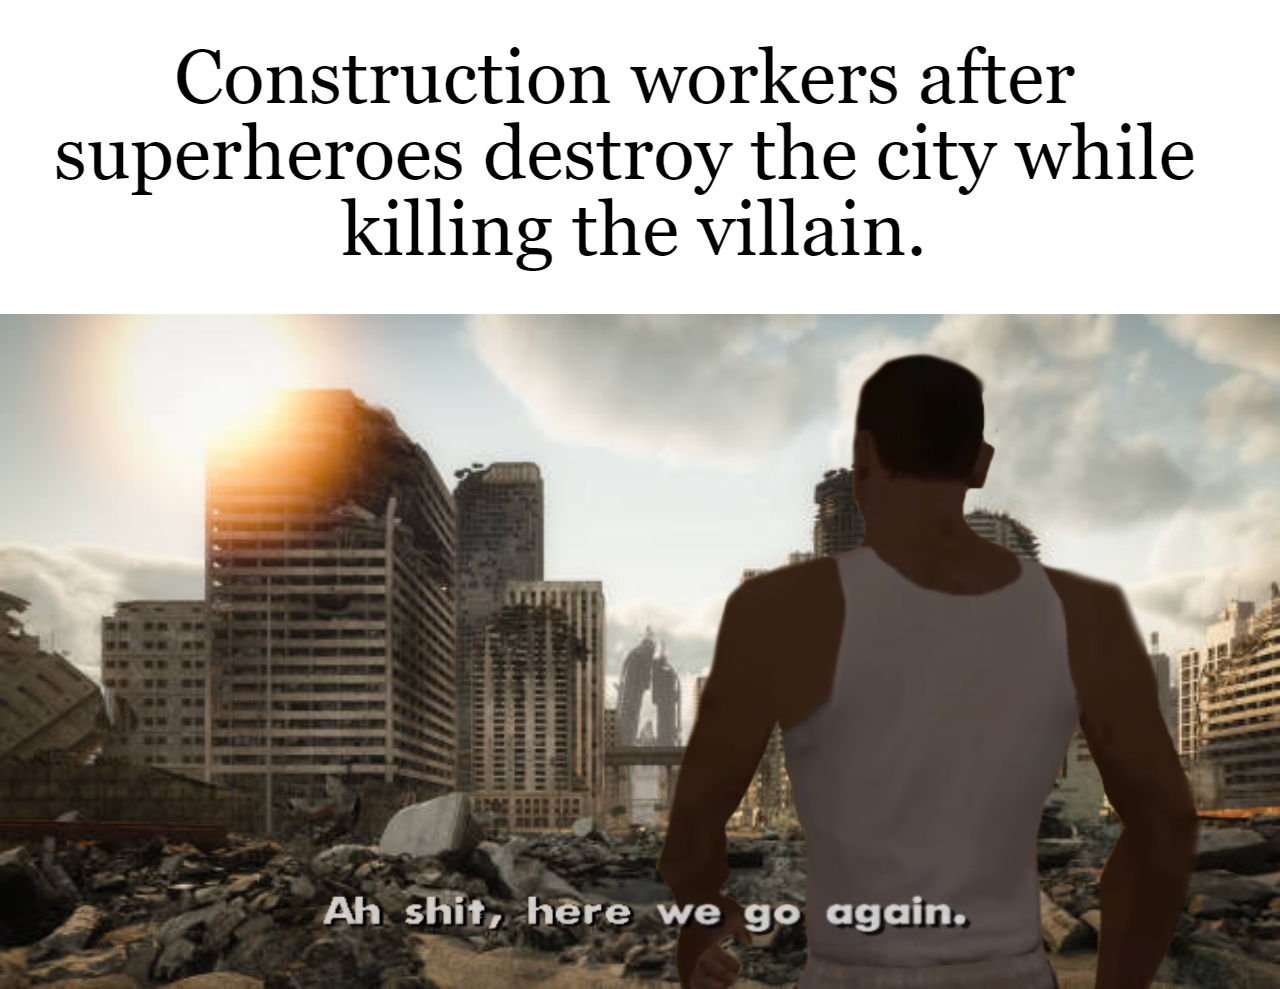 destoyed city - Construction workers after superheroes destroy the city while killing the villain. Ah shit, here we go again.